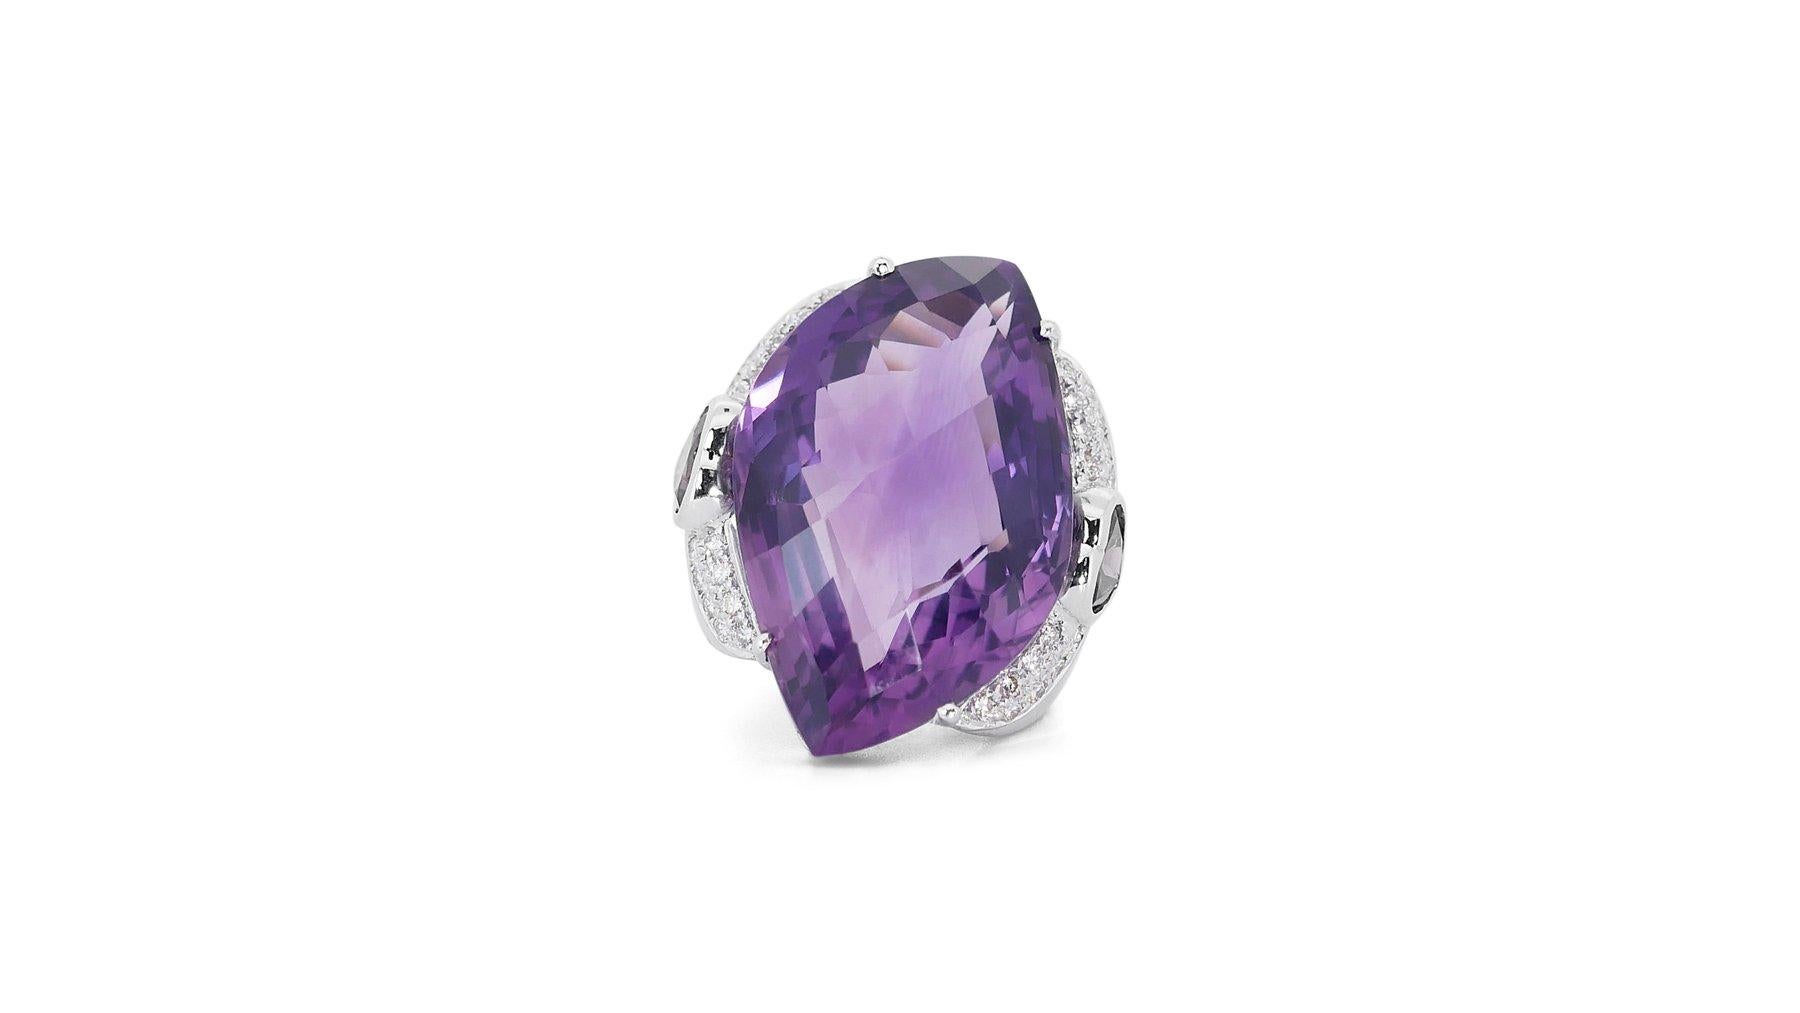 Mixed Cut 18 kt. White Gold Ring with 52.8 carat Natural Diamonds, & Amethysts IGI Cert For Sale